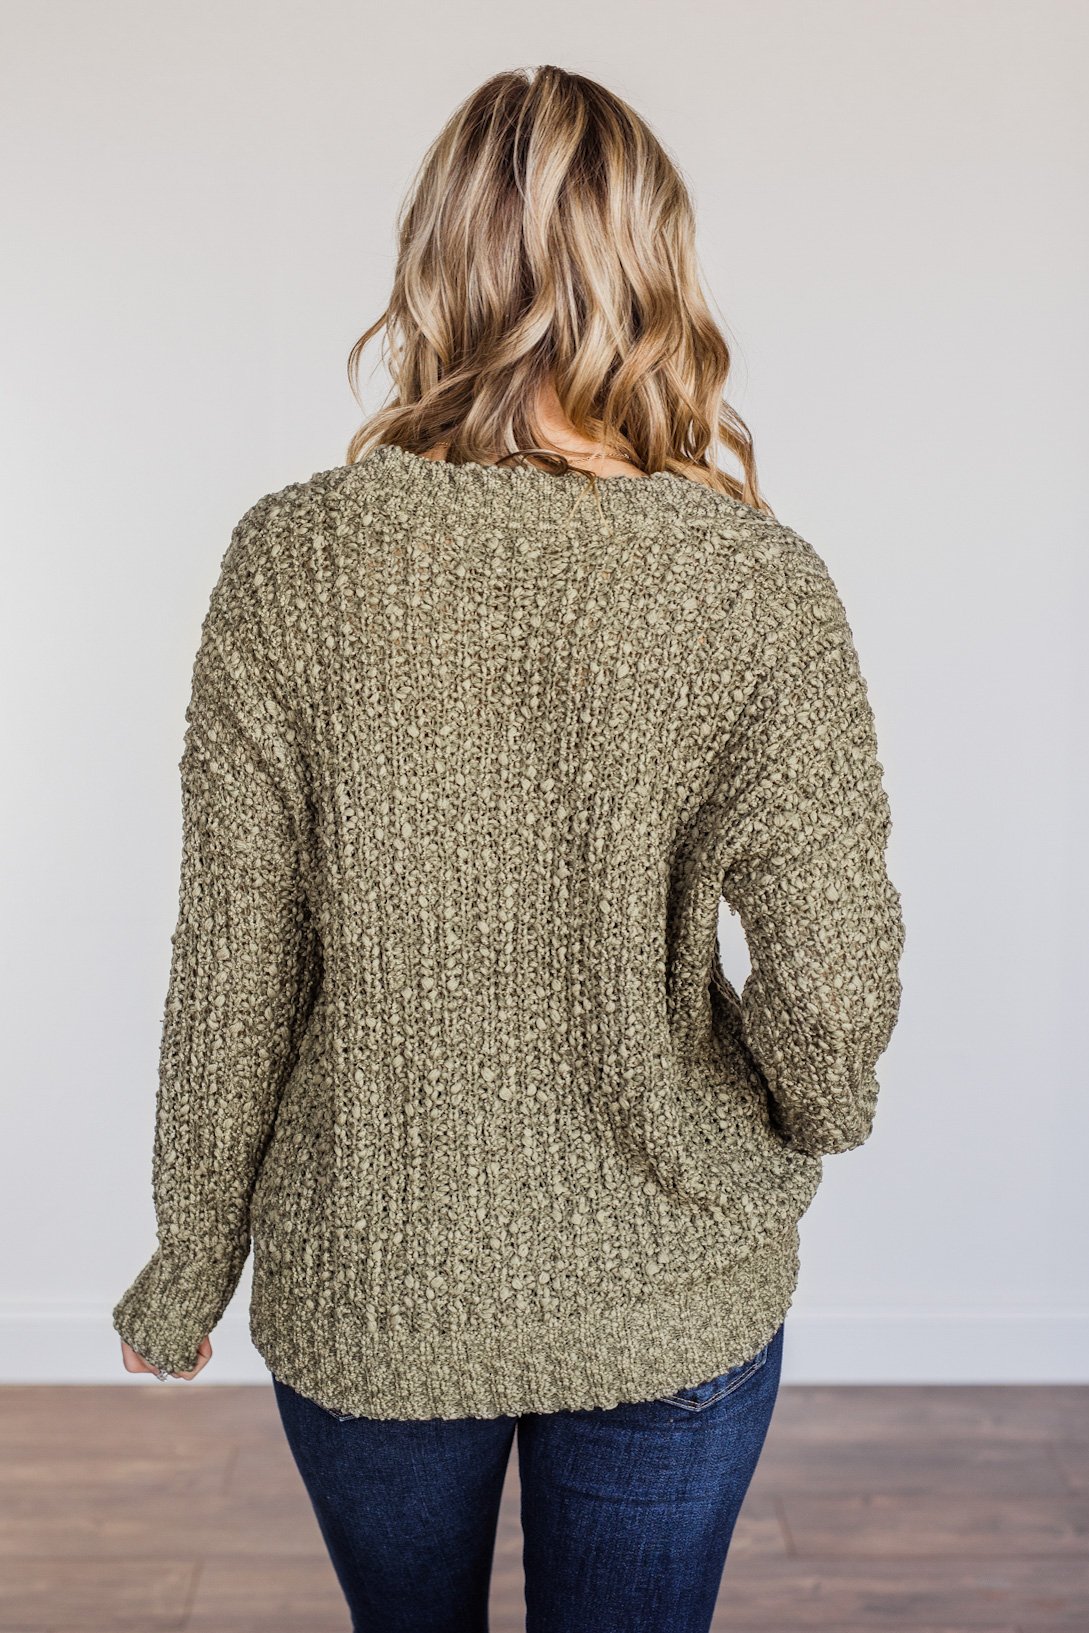 Can't Phase Me Knit Sweater- Olive